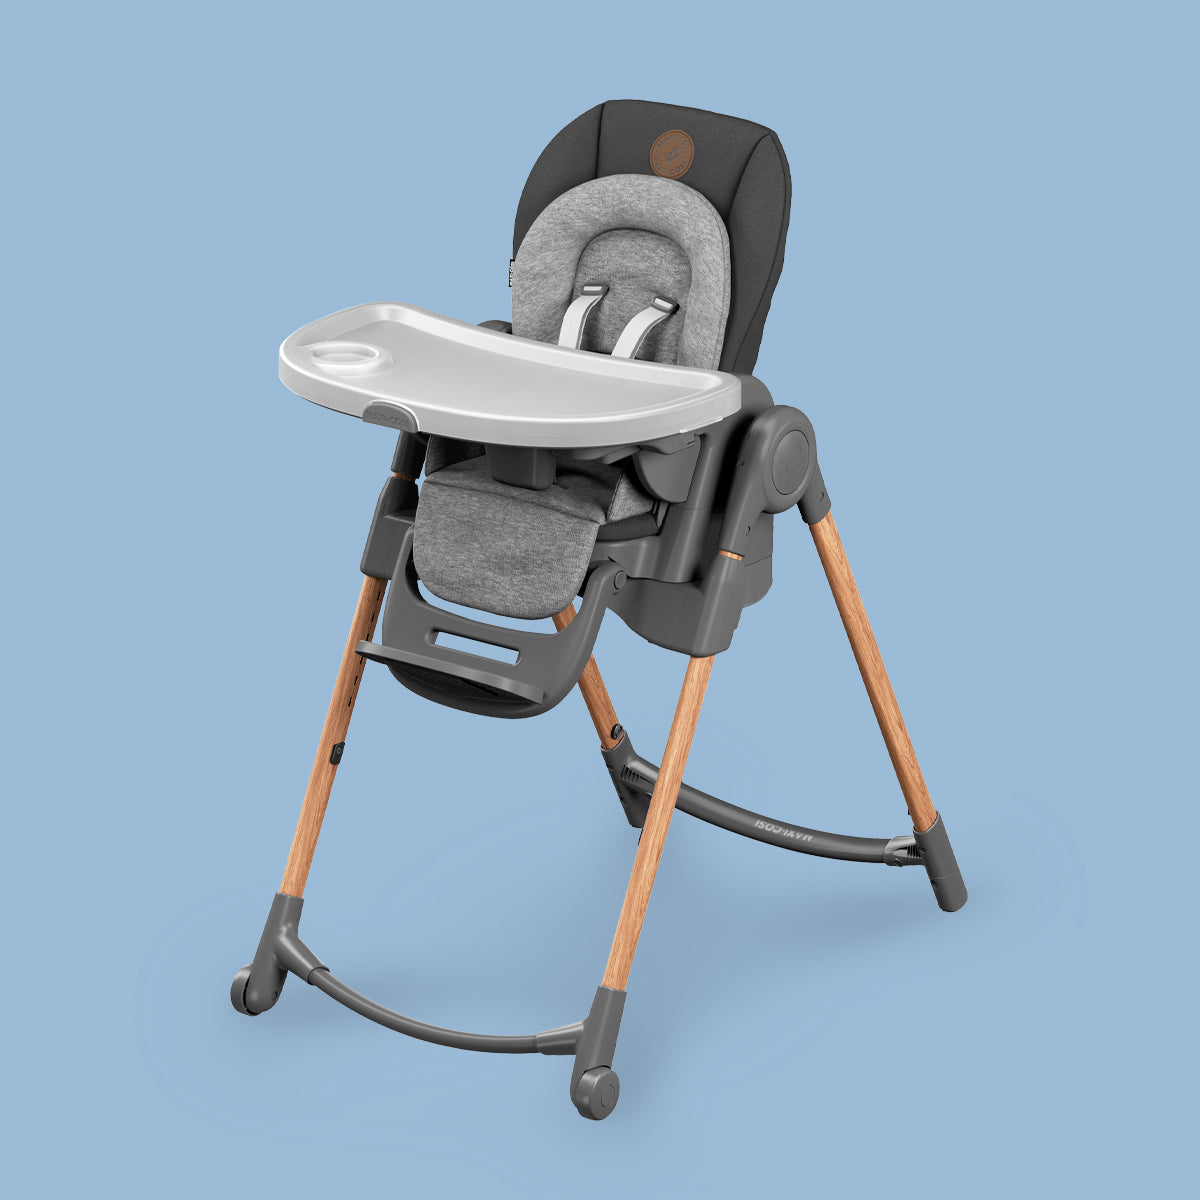 A Maxi-Cosi UAE Minla Baby High Chair on a blue background with adjustable positions.